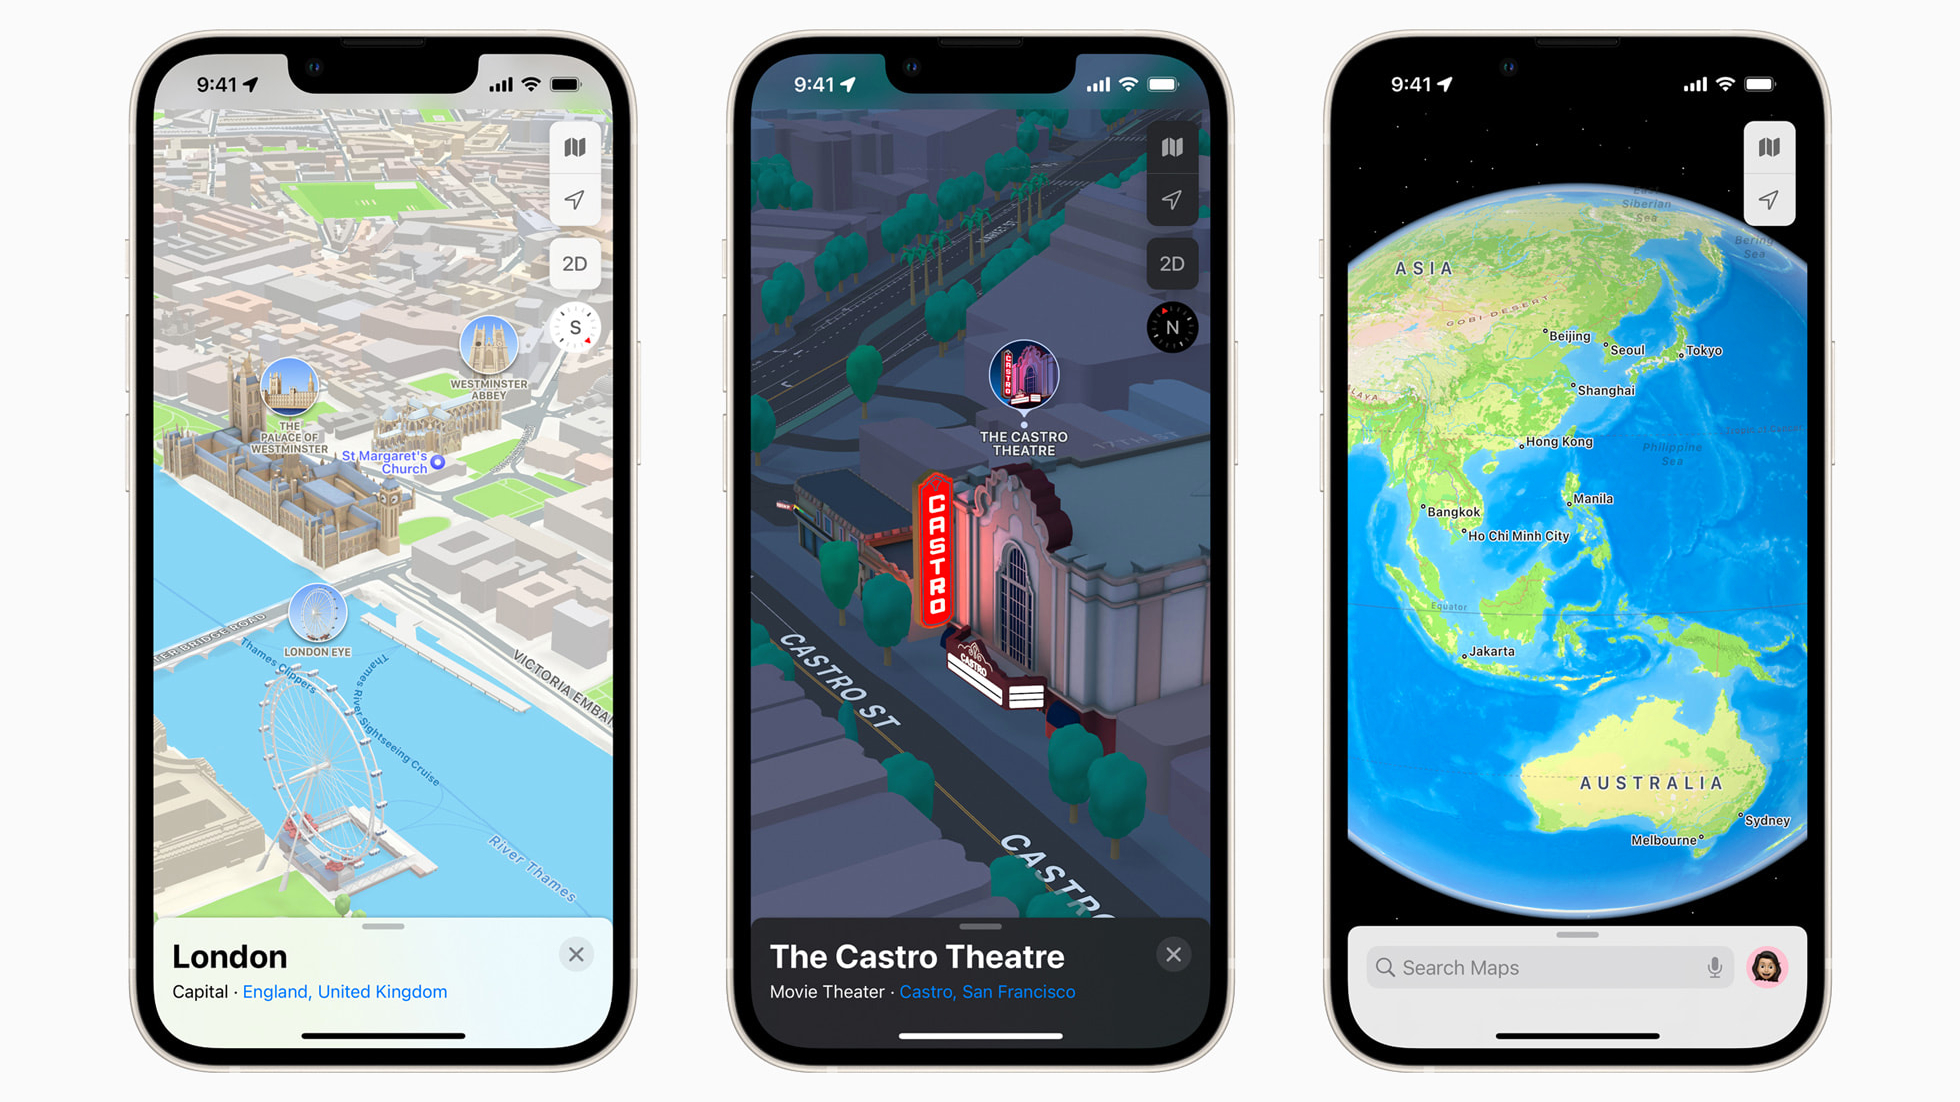 Gurman: Apple Planning to Show Ads in Maps App Starting Next Year